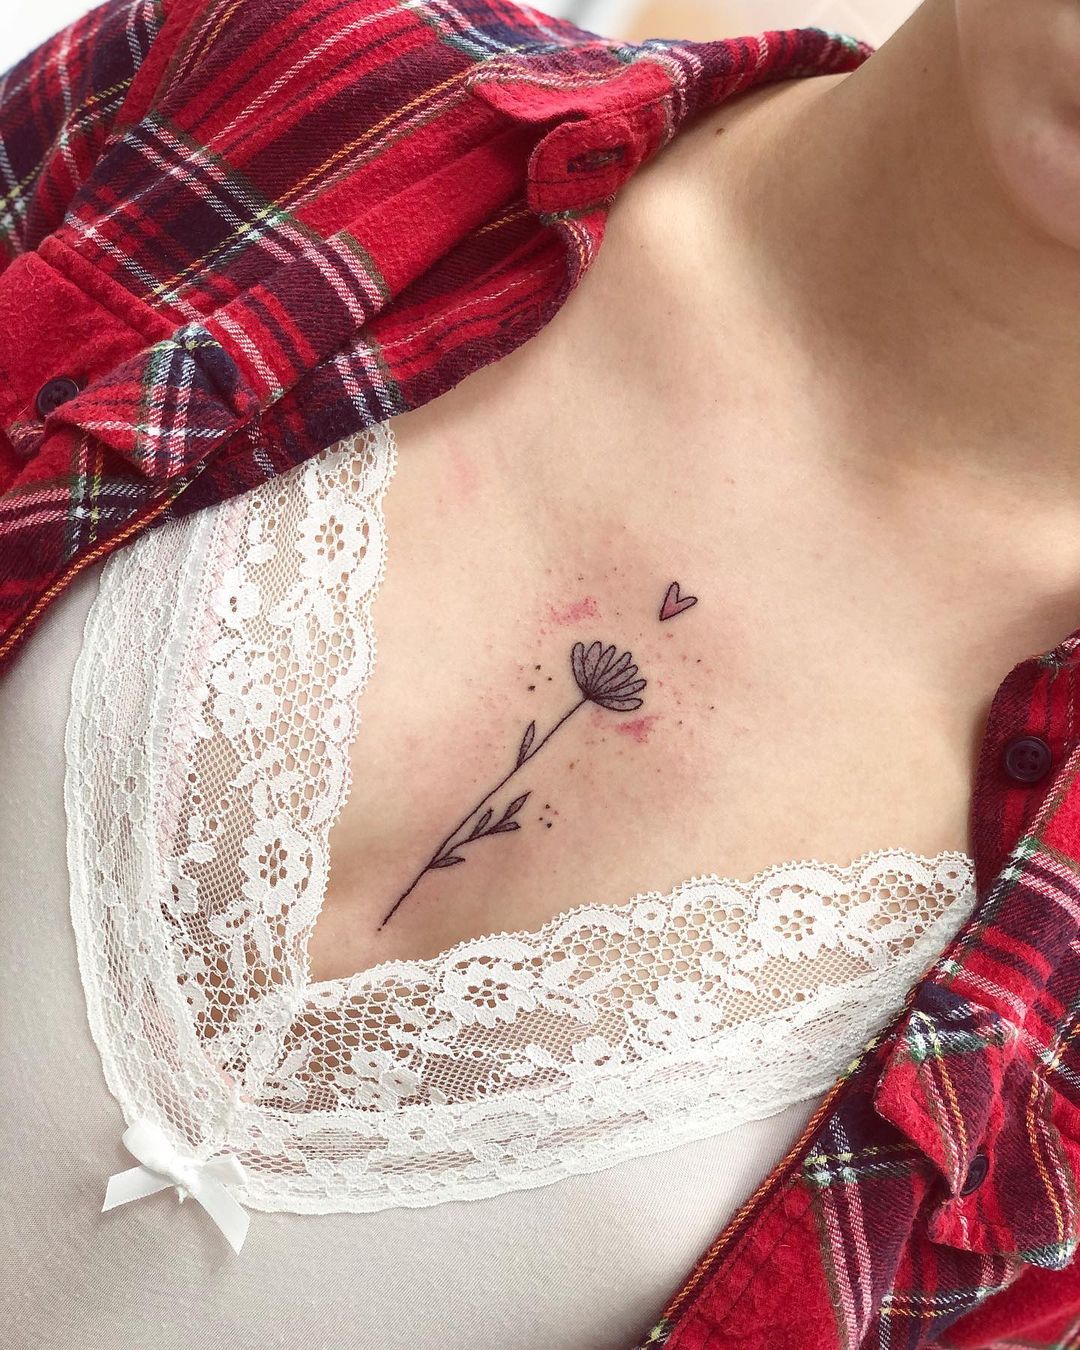 22 Beautiful Roses With Names Tattoo Ideas For Women  Saved Tattoo